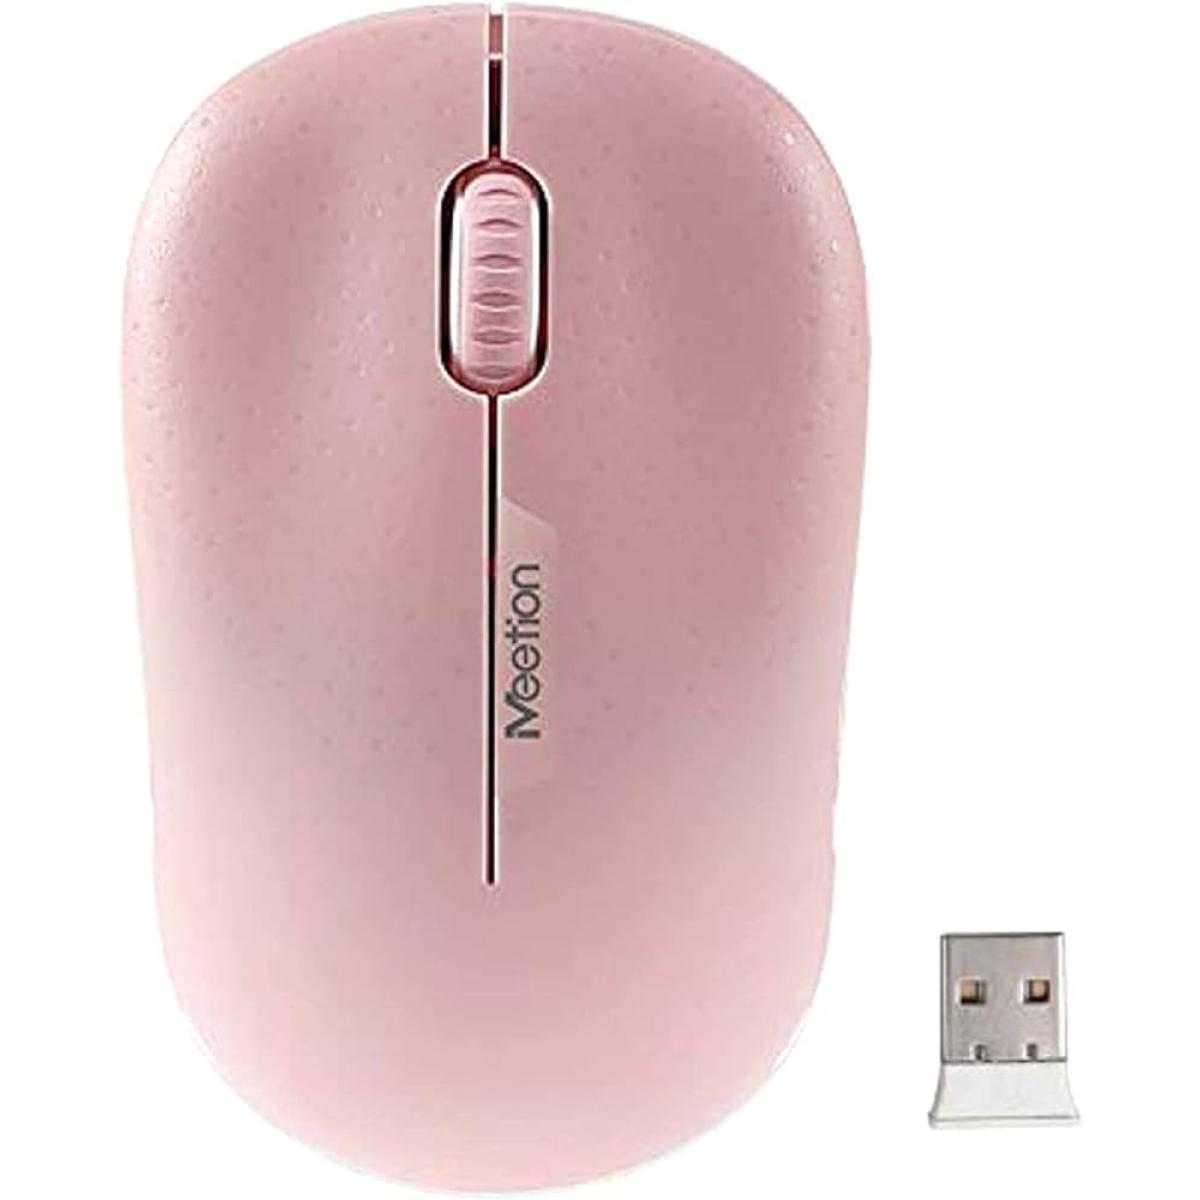 MeeTion Cordless Optical Usb Computer 2.4GHz Wireless Mouse - Pink